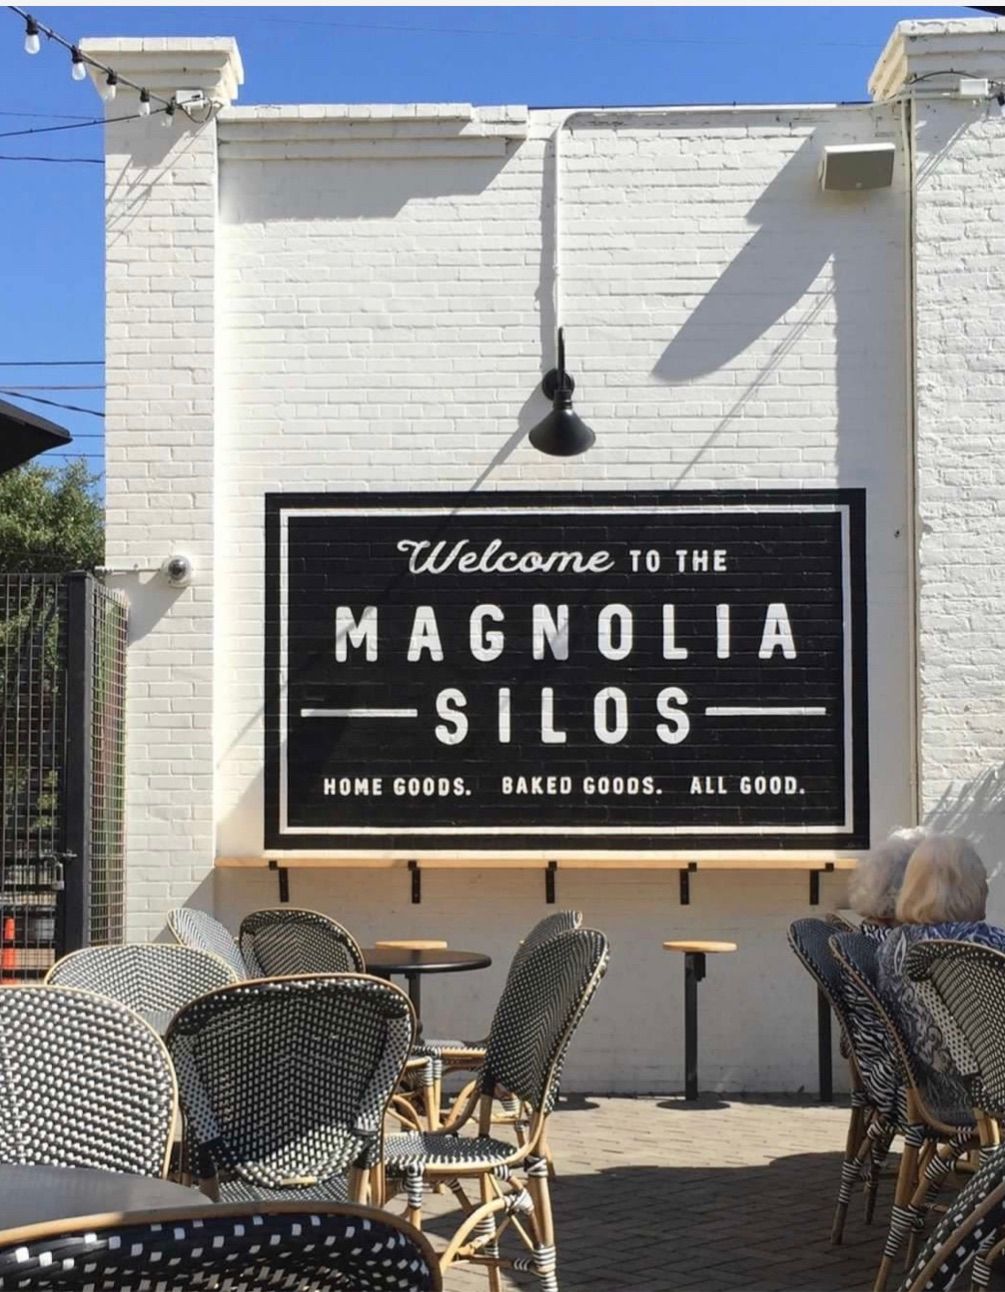 Relaxing Day Trip to Magnolia Silos